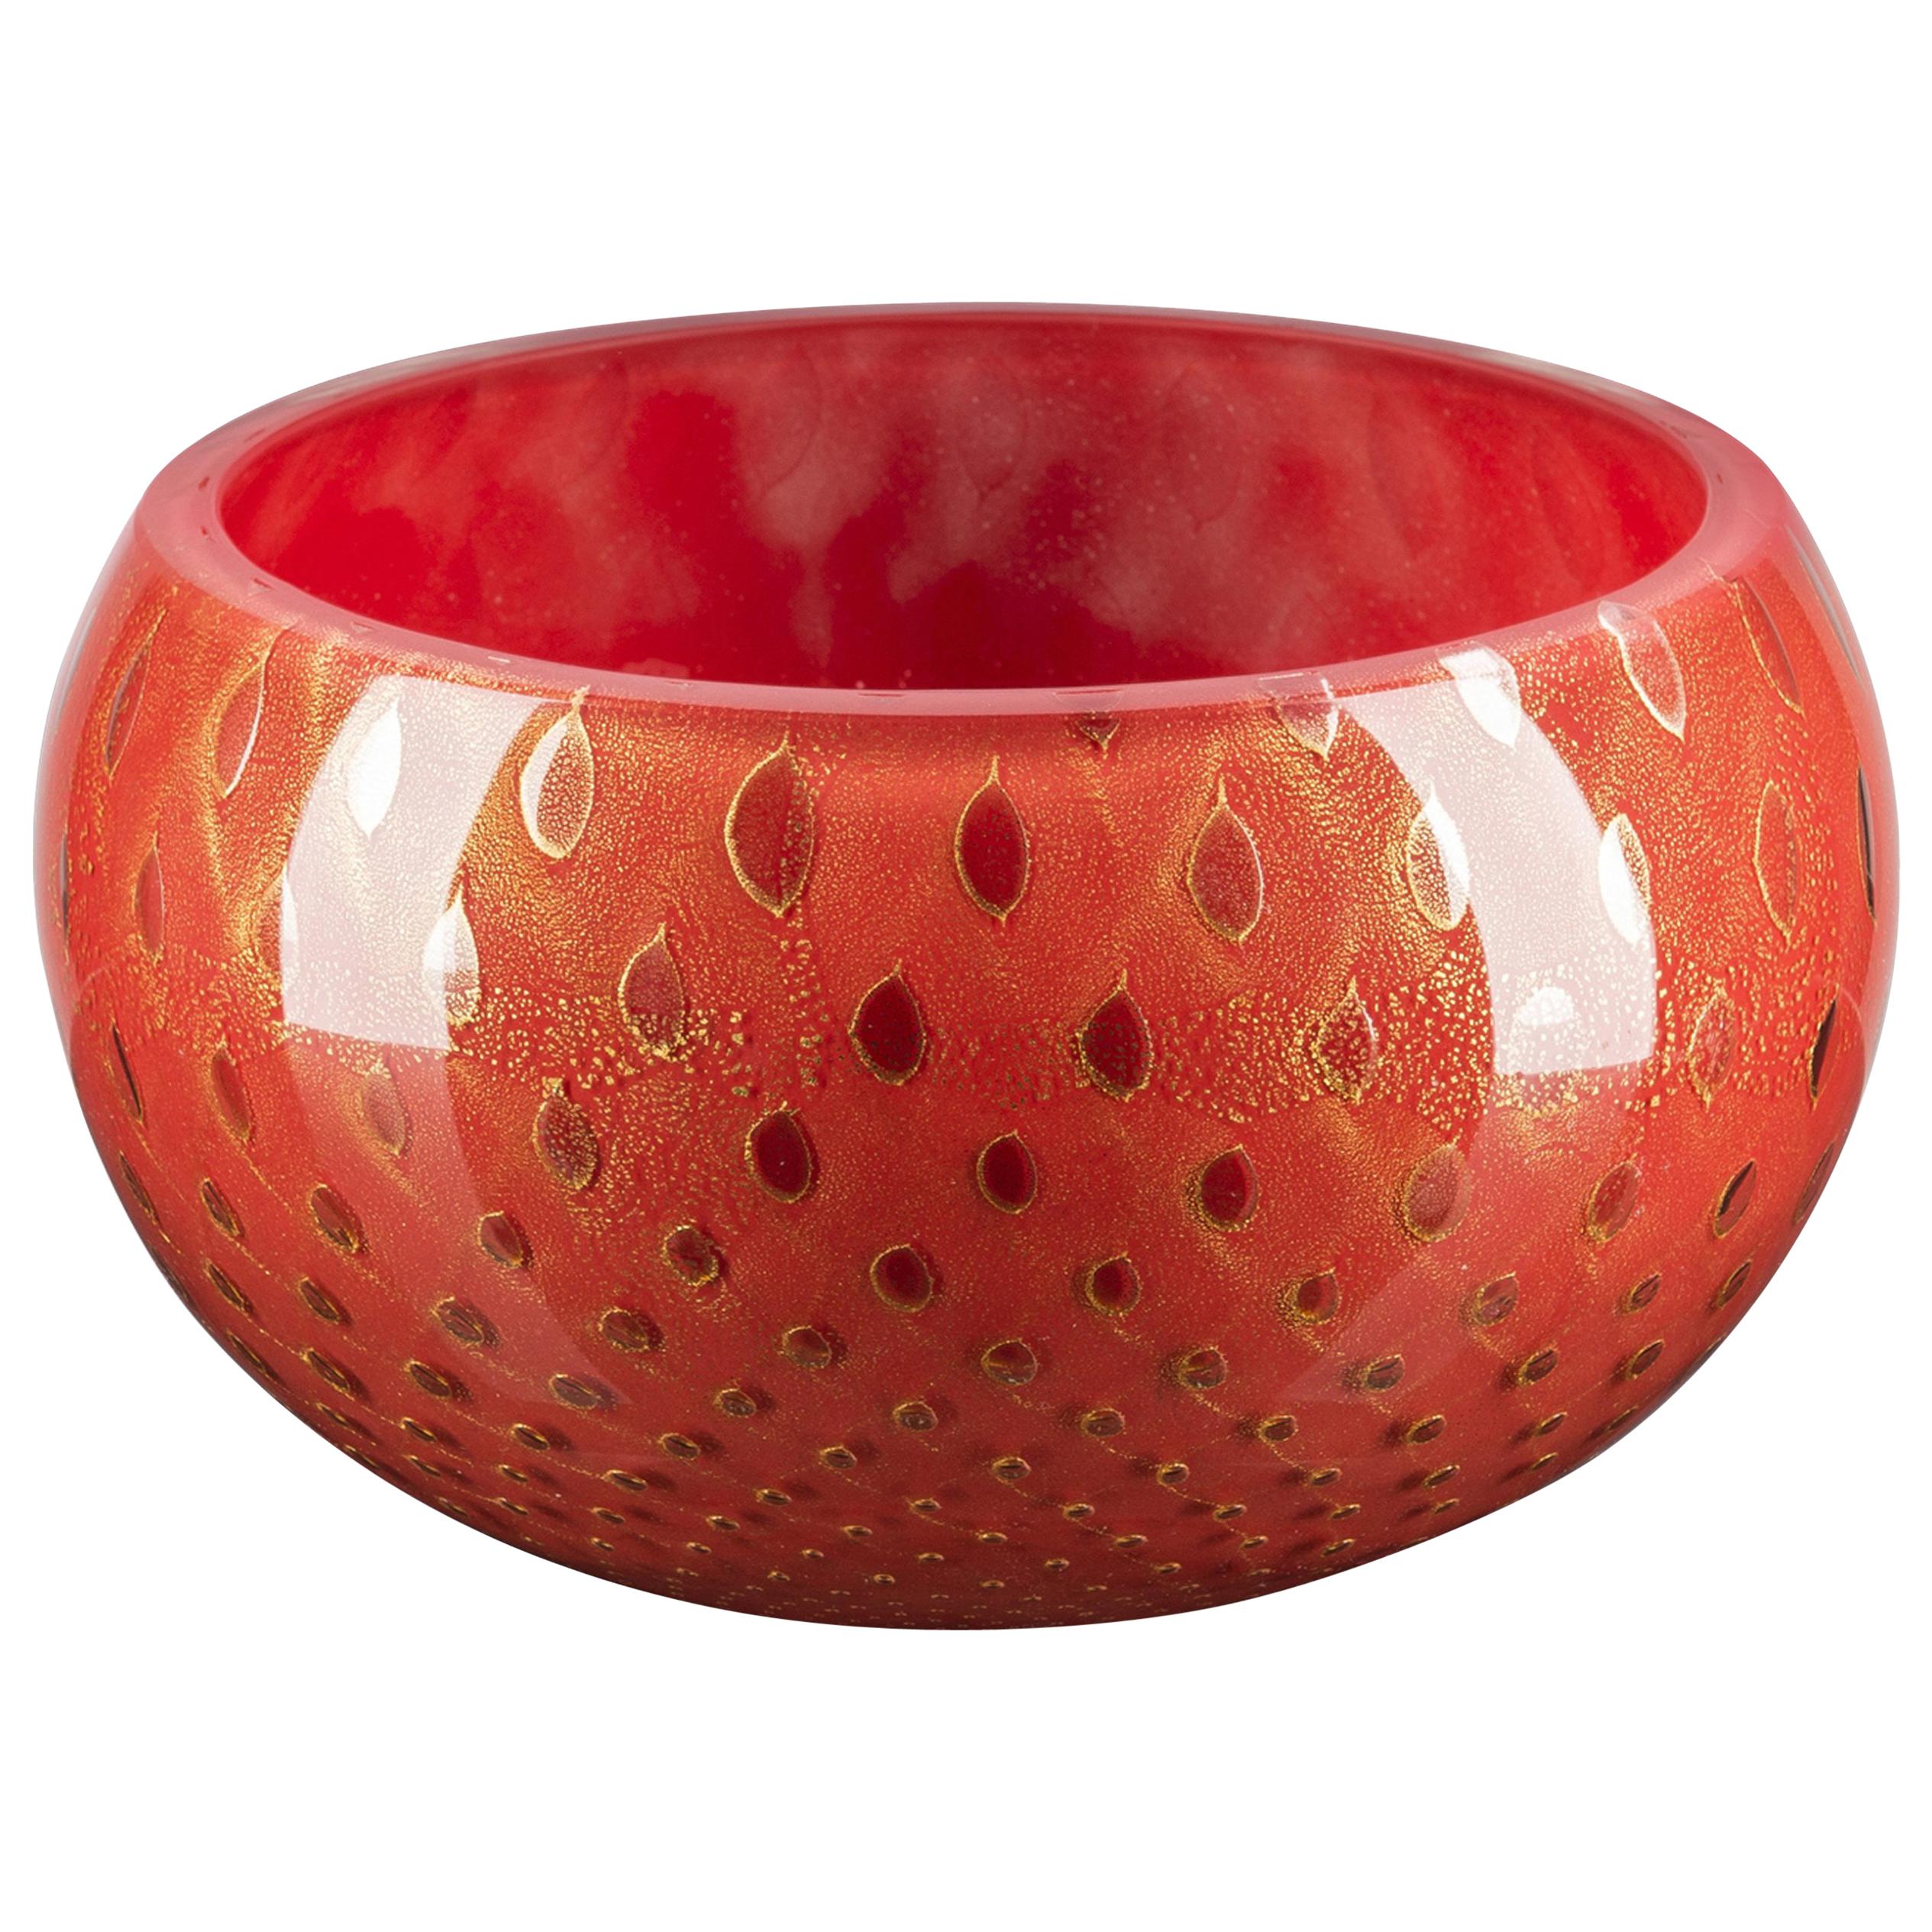 Bowl Mocenigo, Muranese Glass, Gold 24-Karat and Red, Italy For Sale